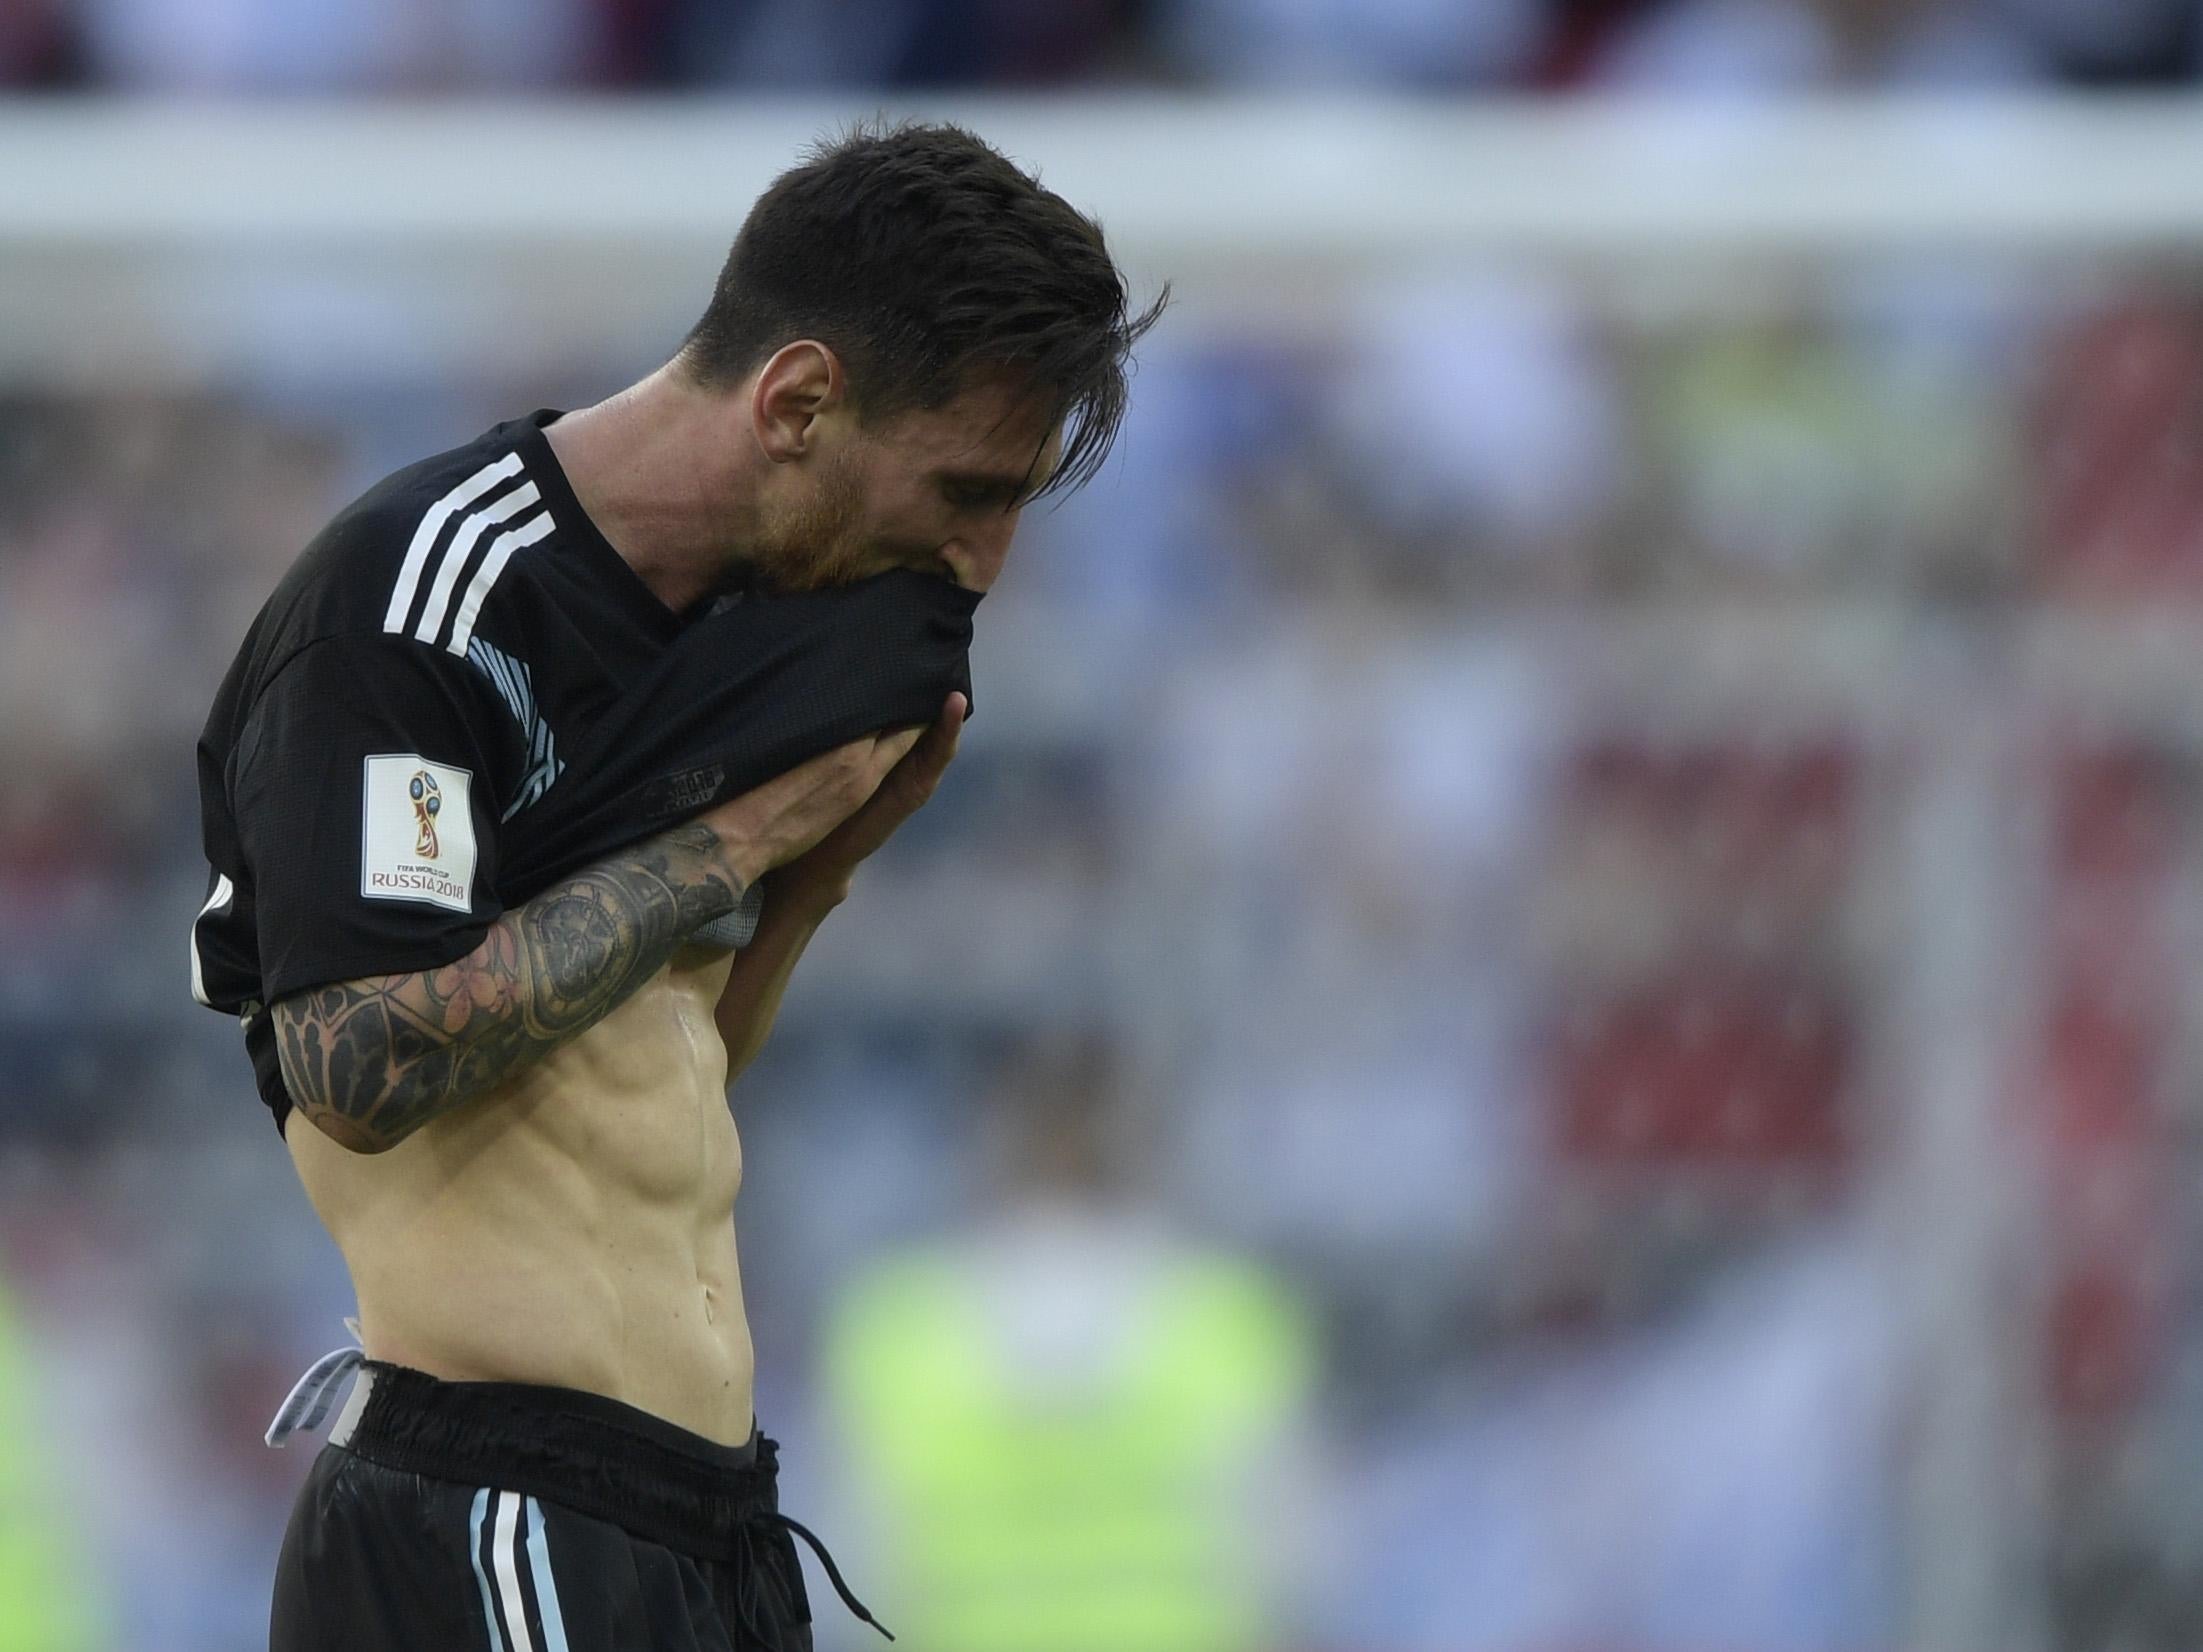 Lionel Messi's Big Miss at the World Cup